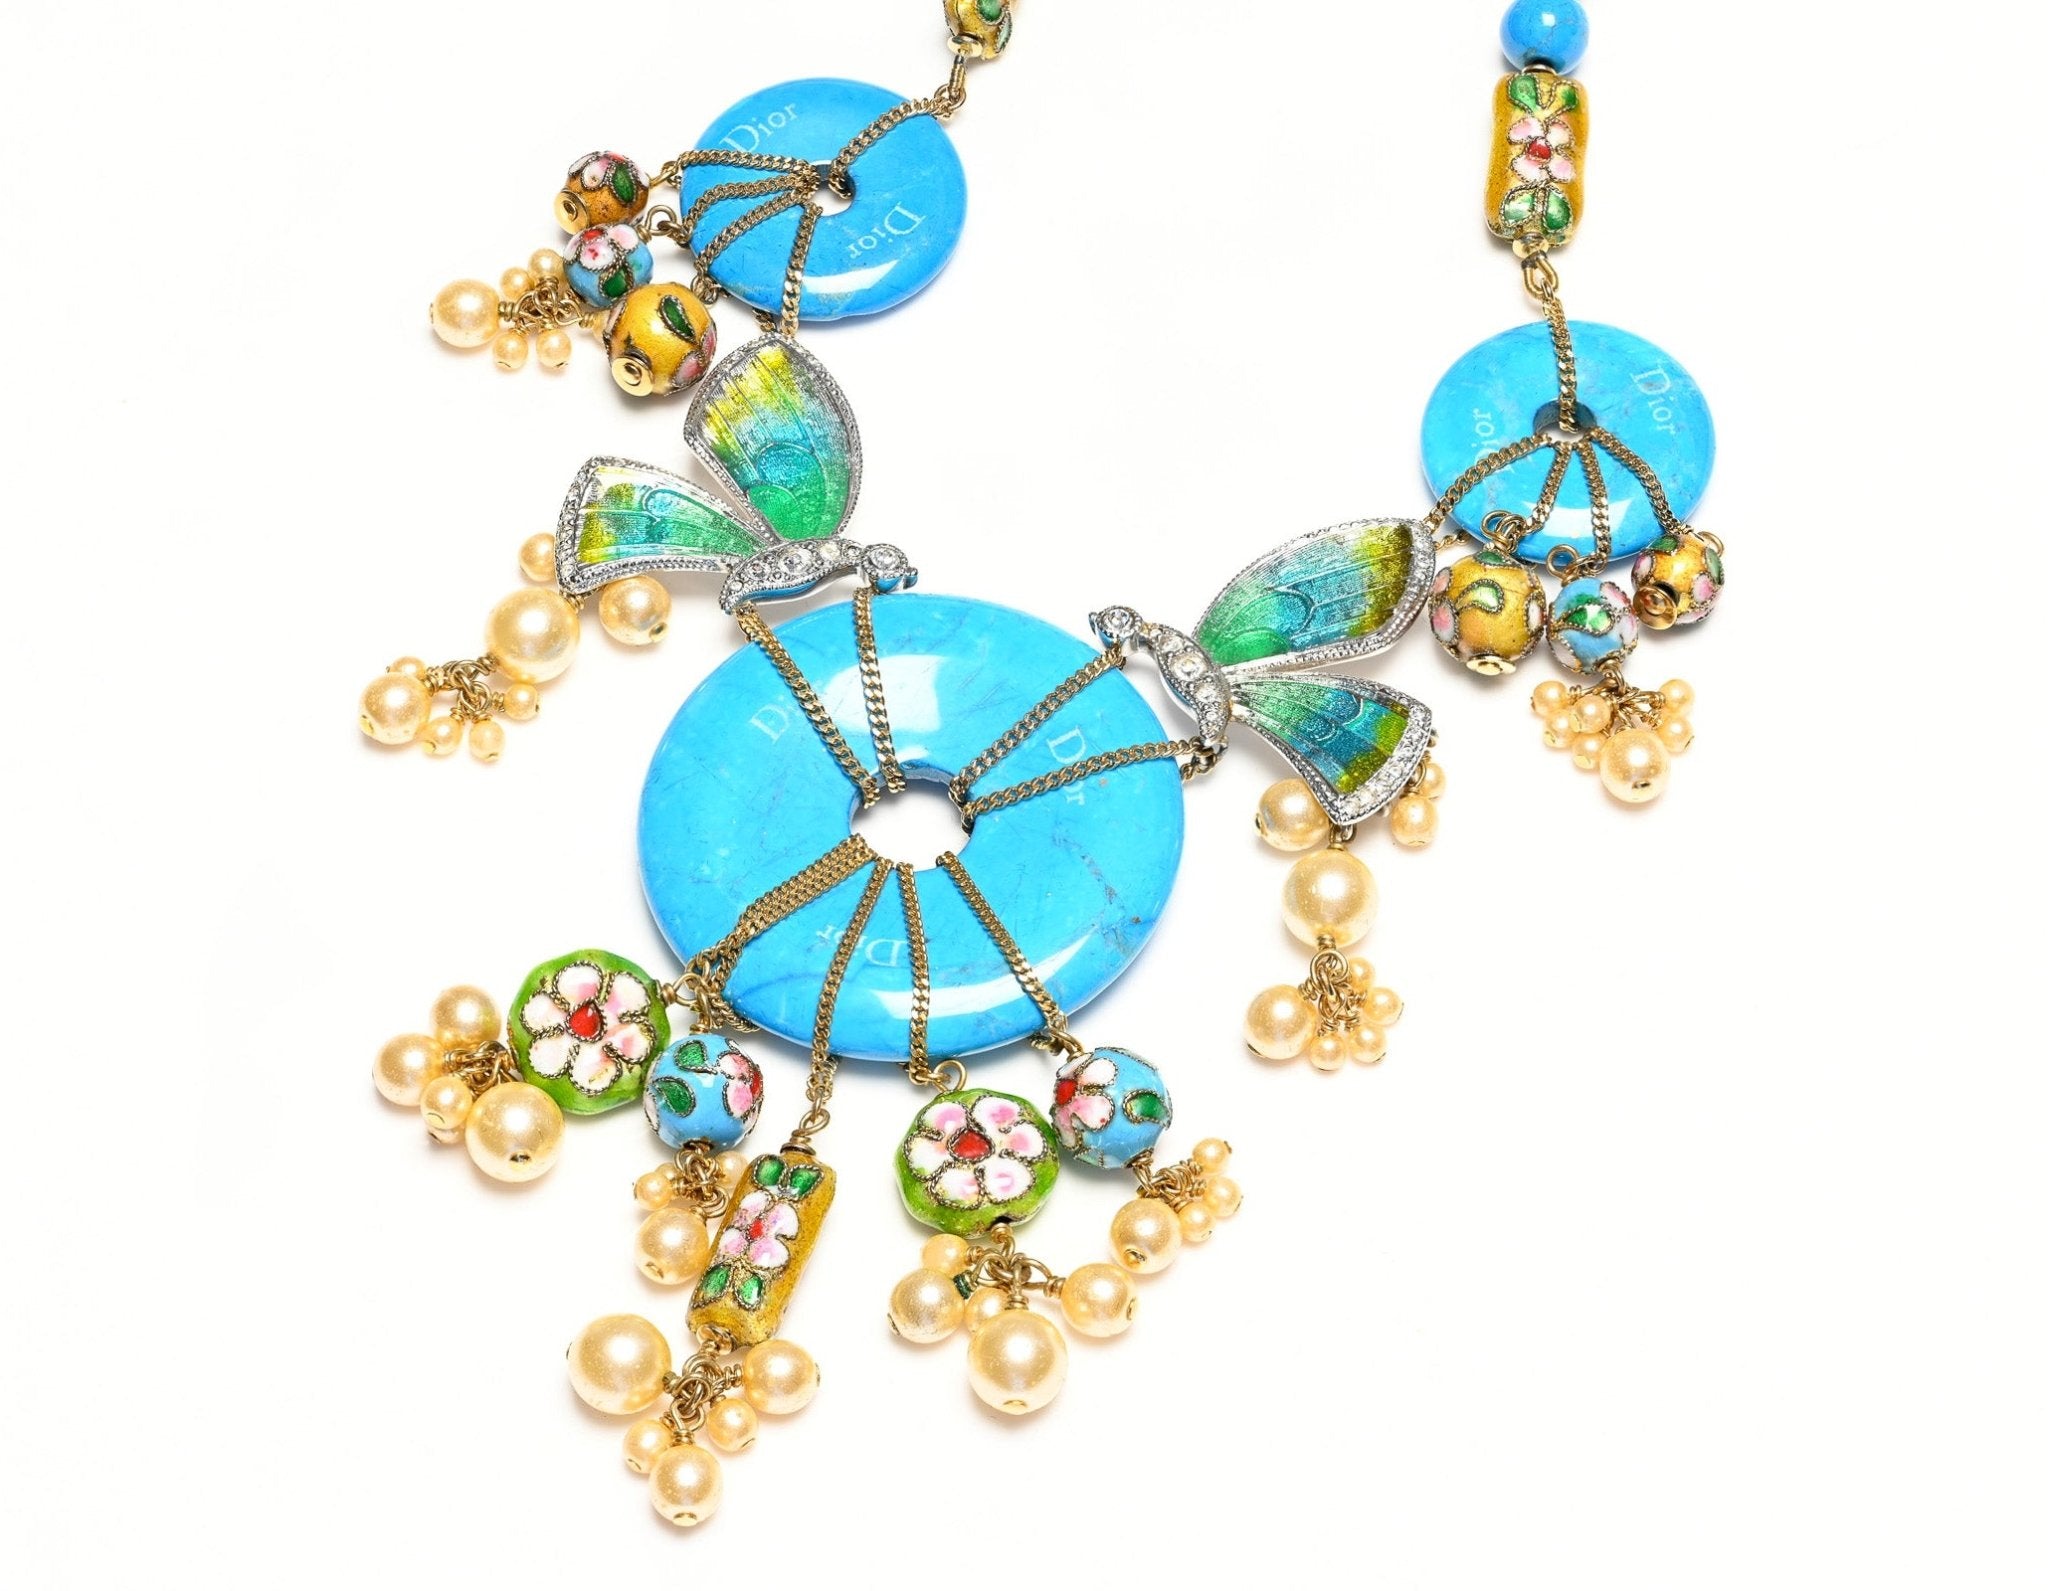 Vintage Christian Dior Galliano Tonkidior 2006 Turquoise Beads Enamel Butterfly Necklace